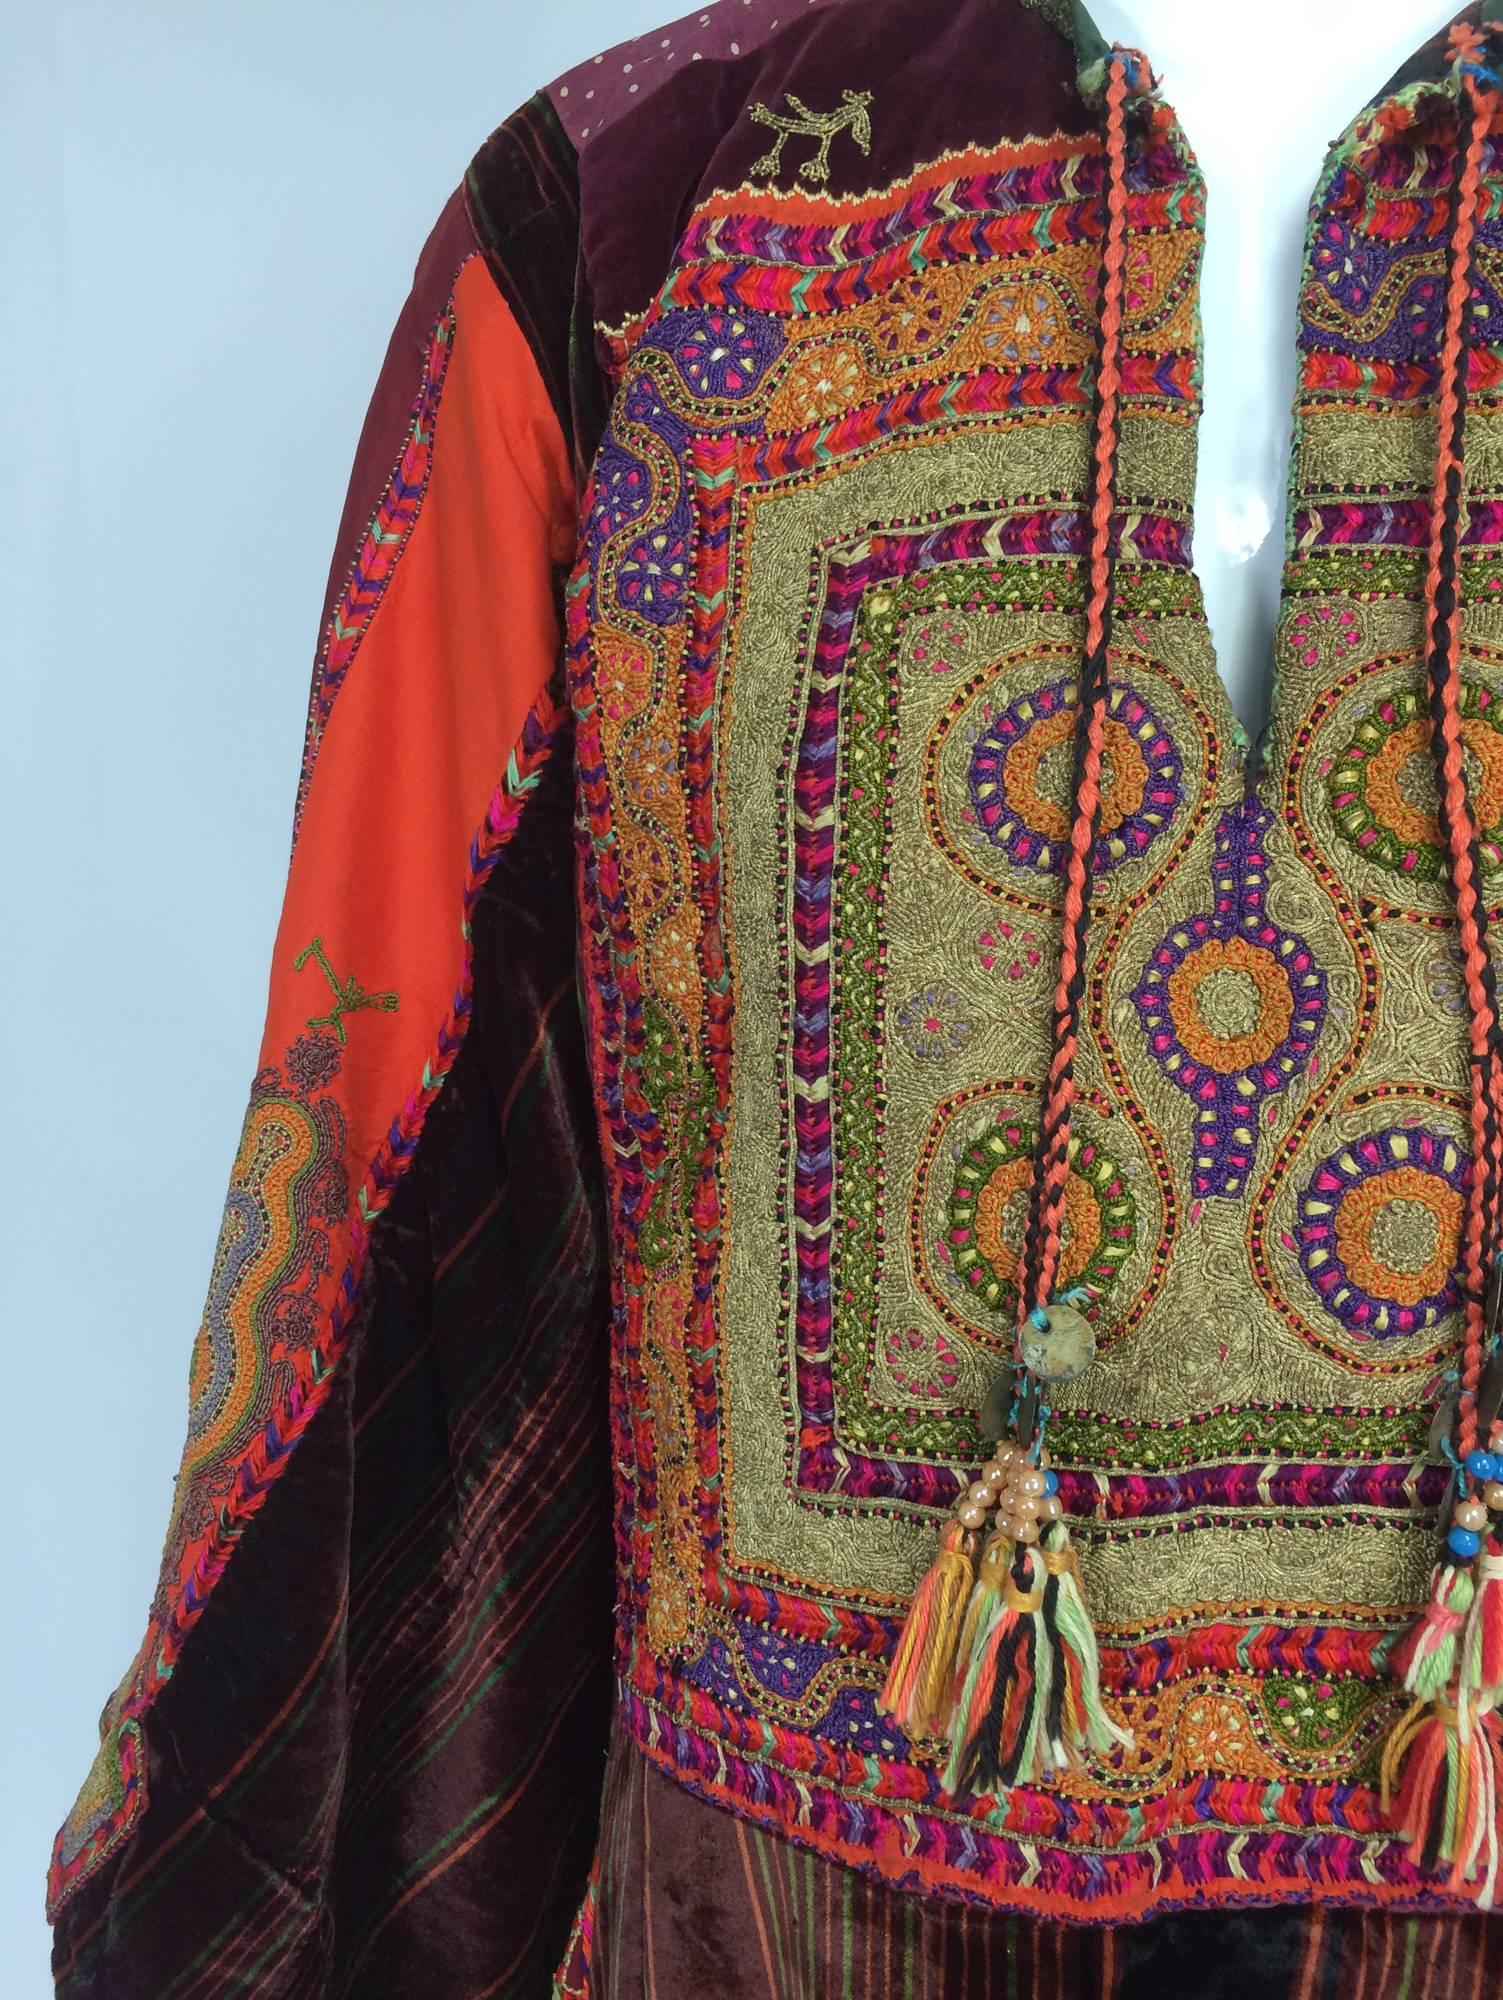 Mid 20th C. Palestinian traditional embroidered velvet robe...A beautiful robe of rich velvet in stripes of varying widths of wine, amber & green...Densely embroidered front panel of fine burnished gold and silver cord work and brightly coloured